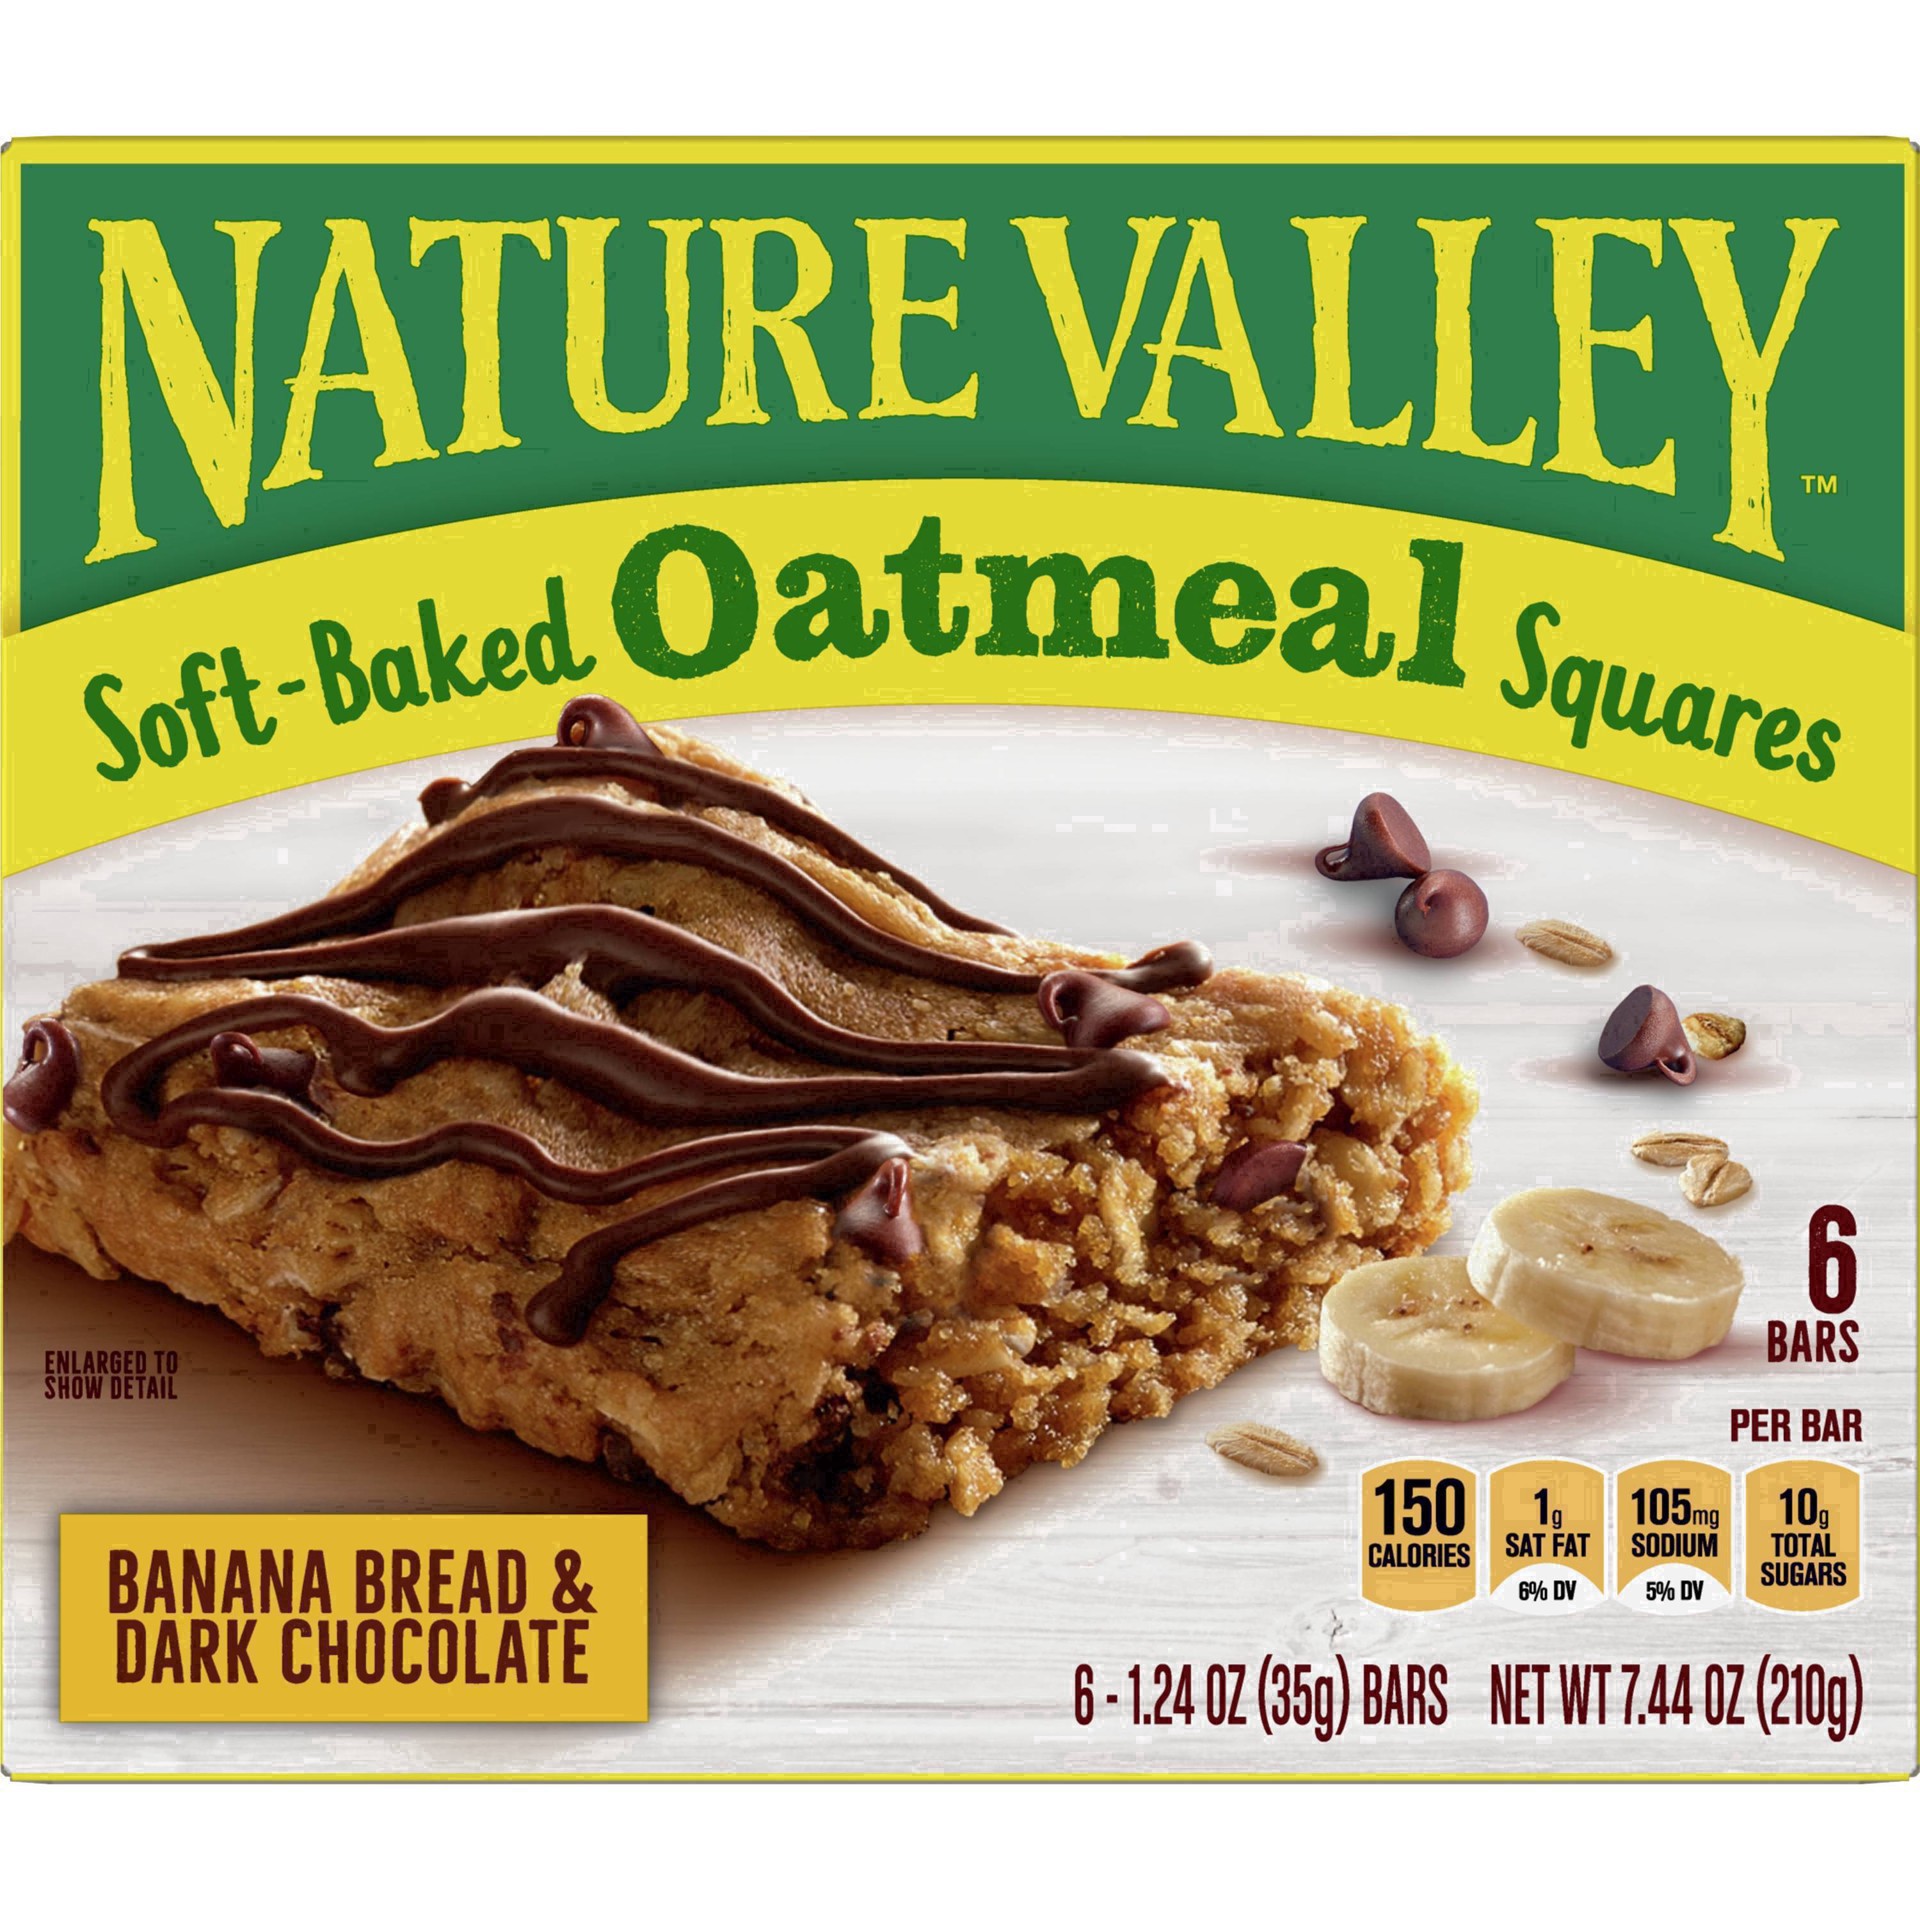 slide 65 of 101, Nature Valley Soft-Baked Oatmeal Squares, Banana Bread & Dark Chocolate, 6 ct, 6 ct